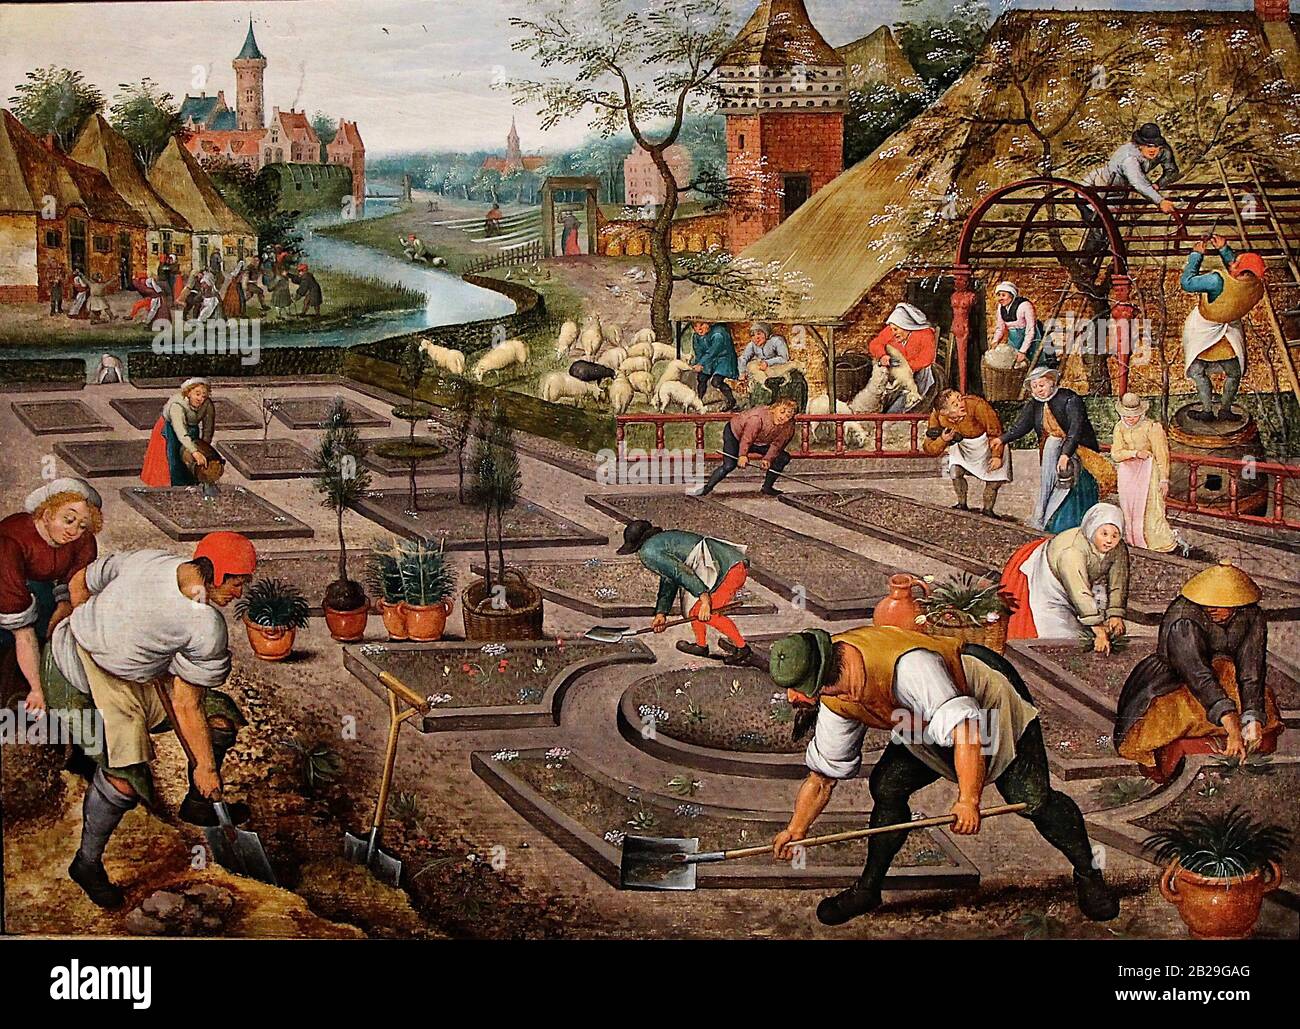 Spring (circa 1625) painting by Pieter Bruegel (Brueghel) the Younger (II) - Very high quality and resolution image Stock Photo